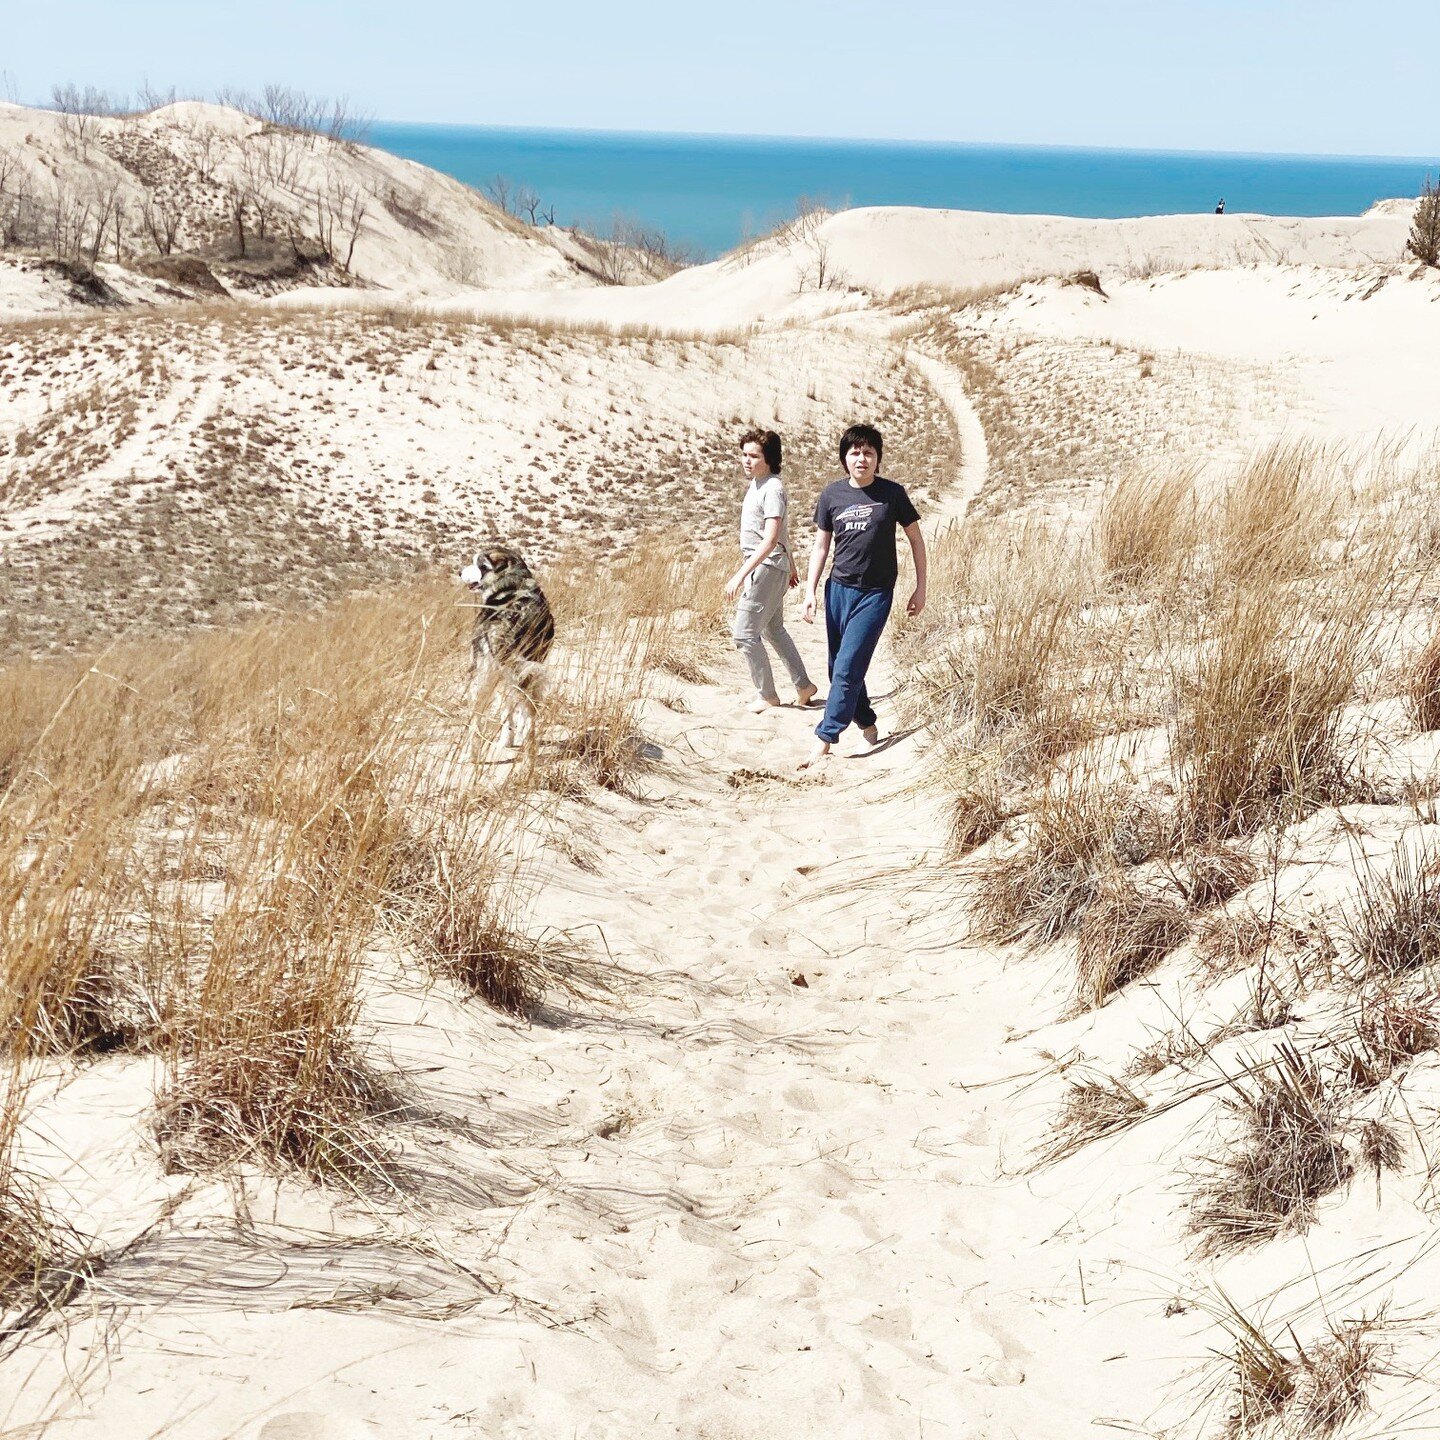 SOL HAUS is 5 minutes from famous Warren Dunes State Park. Hiking the sand dunes will take your breath away. BOOK SOL HAUS NOW. #solhausretreat #solhausmichigan #summervacation #puremichigan #bluefishvacations #hygge #harborcountrymichigan #southwest